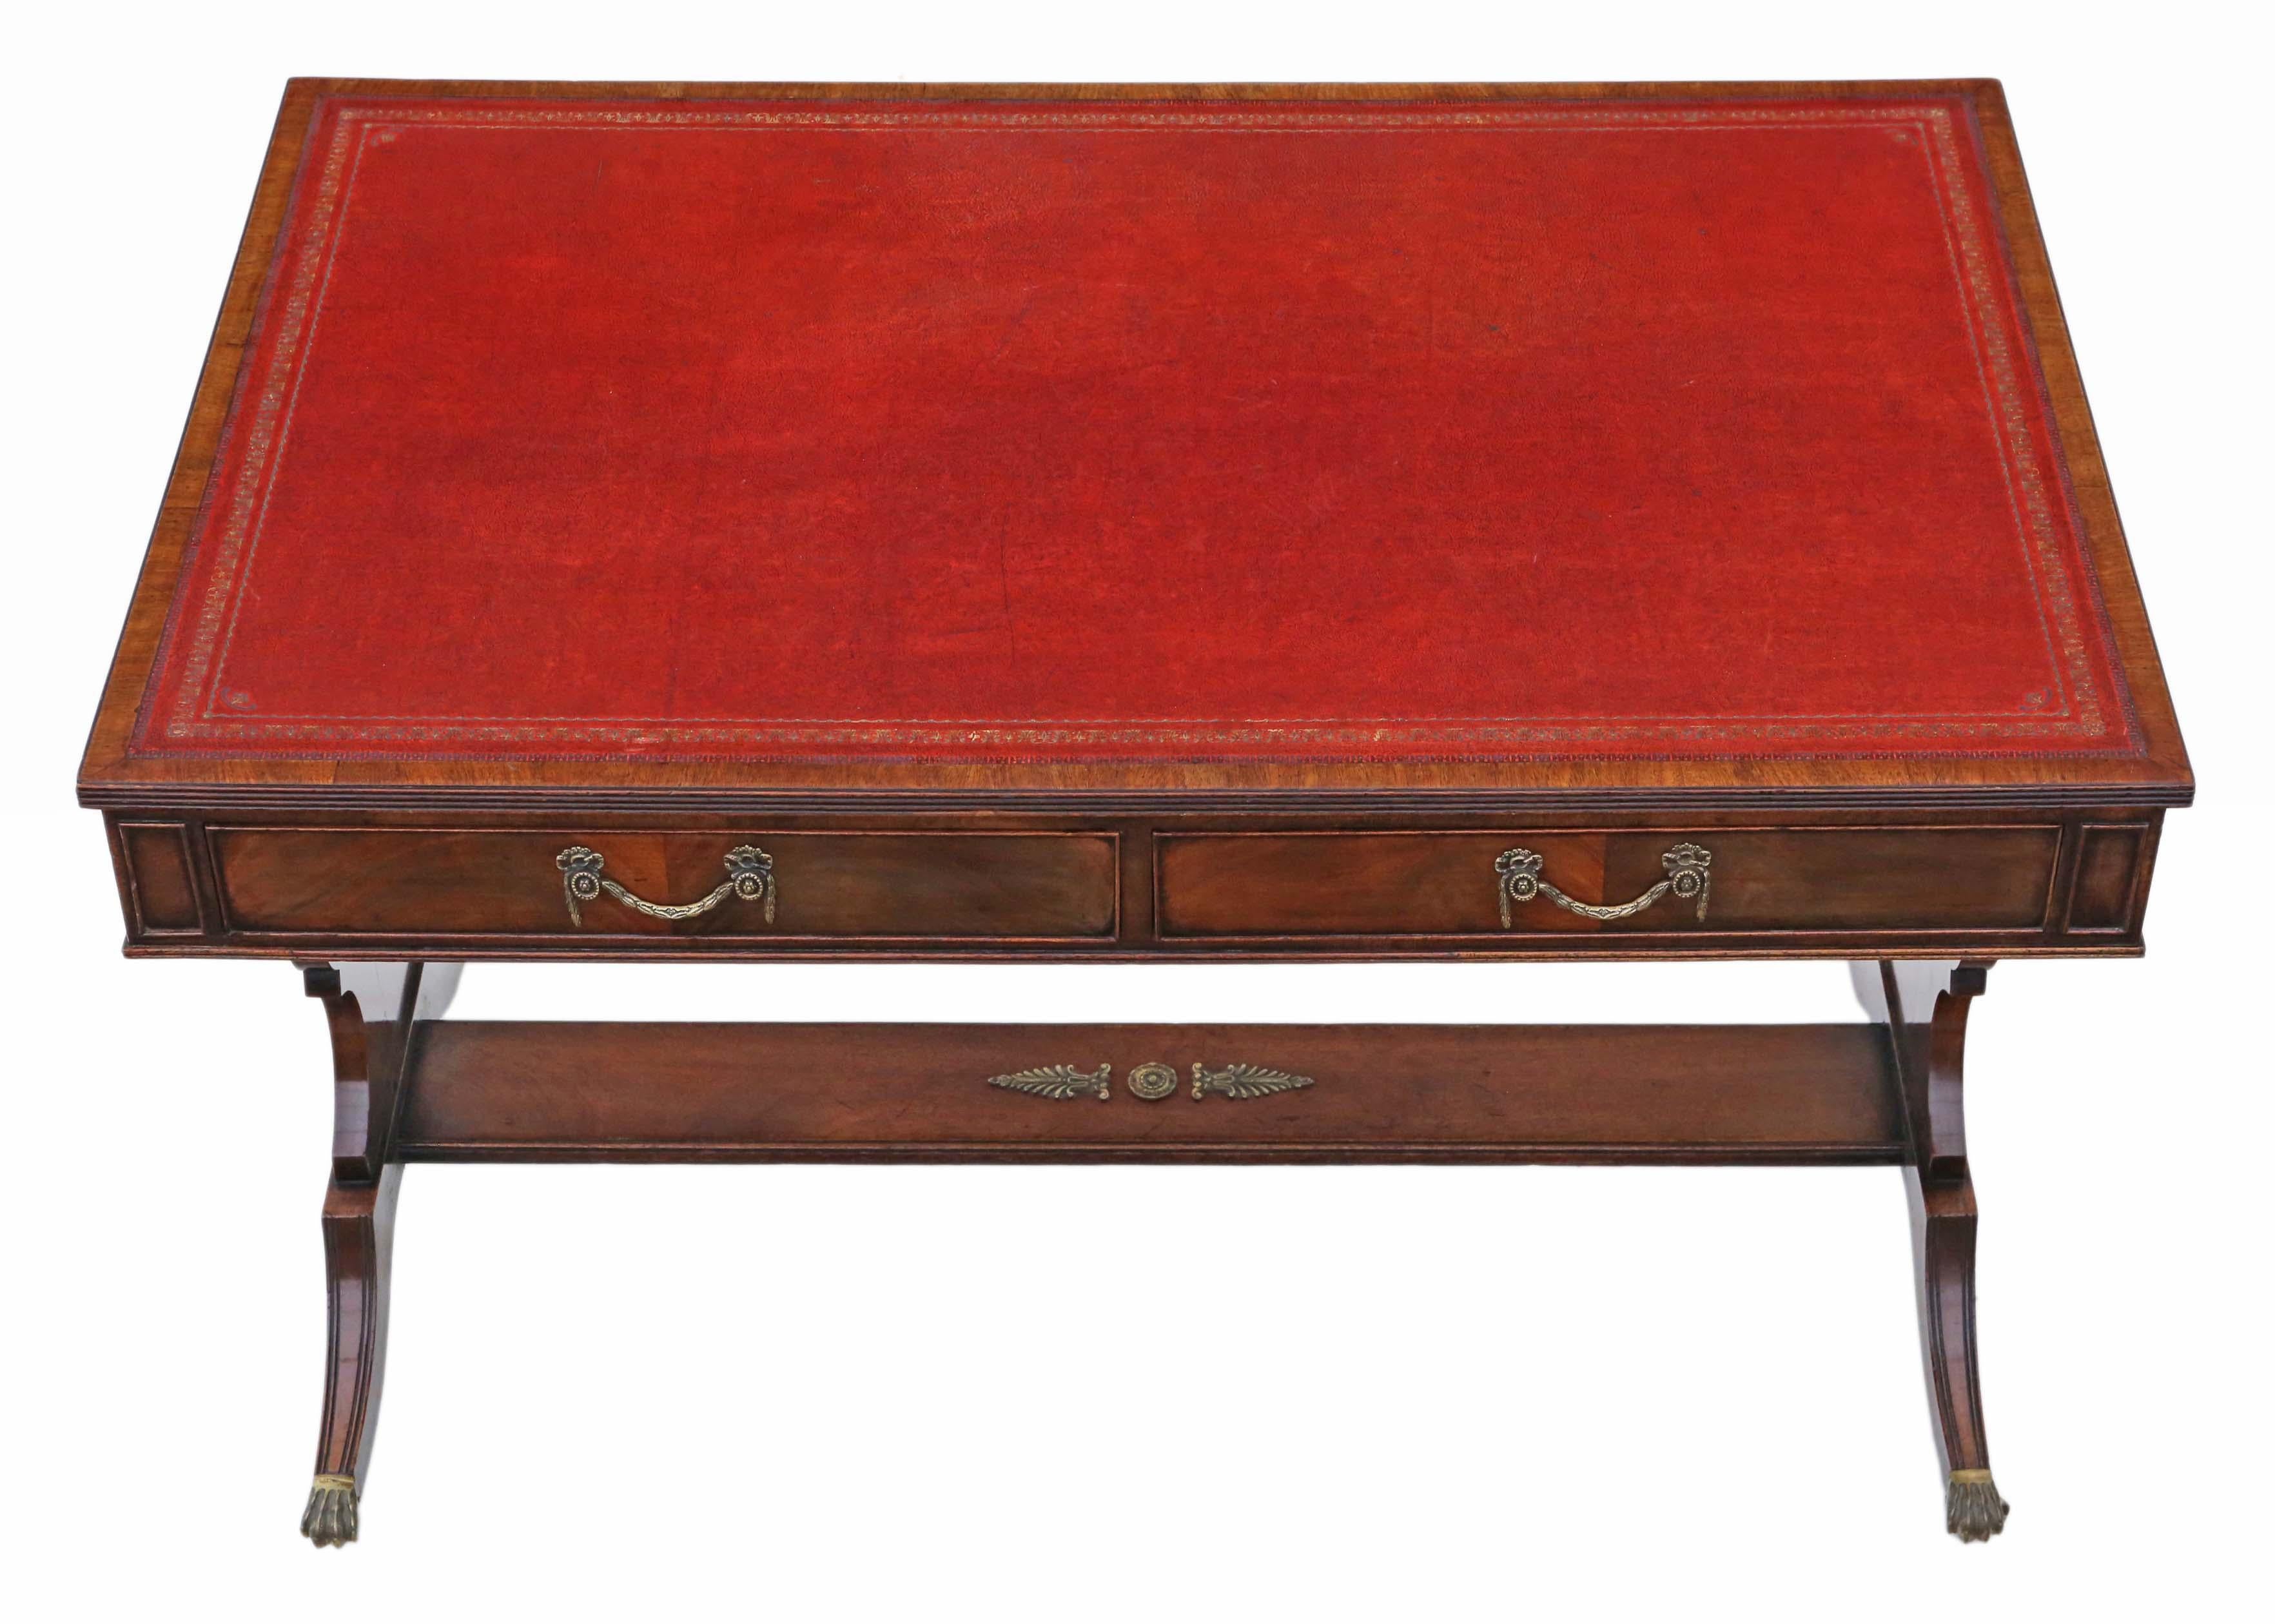 Antique quality flame mahogany writing table or desk 19th century revival, C1920.

No loose joints. Full of age, character and charm. The drawers slide freely. A rare and attractive find. The oak lined drawers slide freely.

Patinated tooled